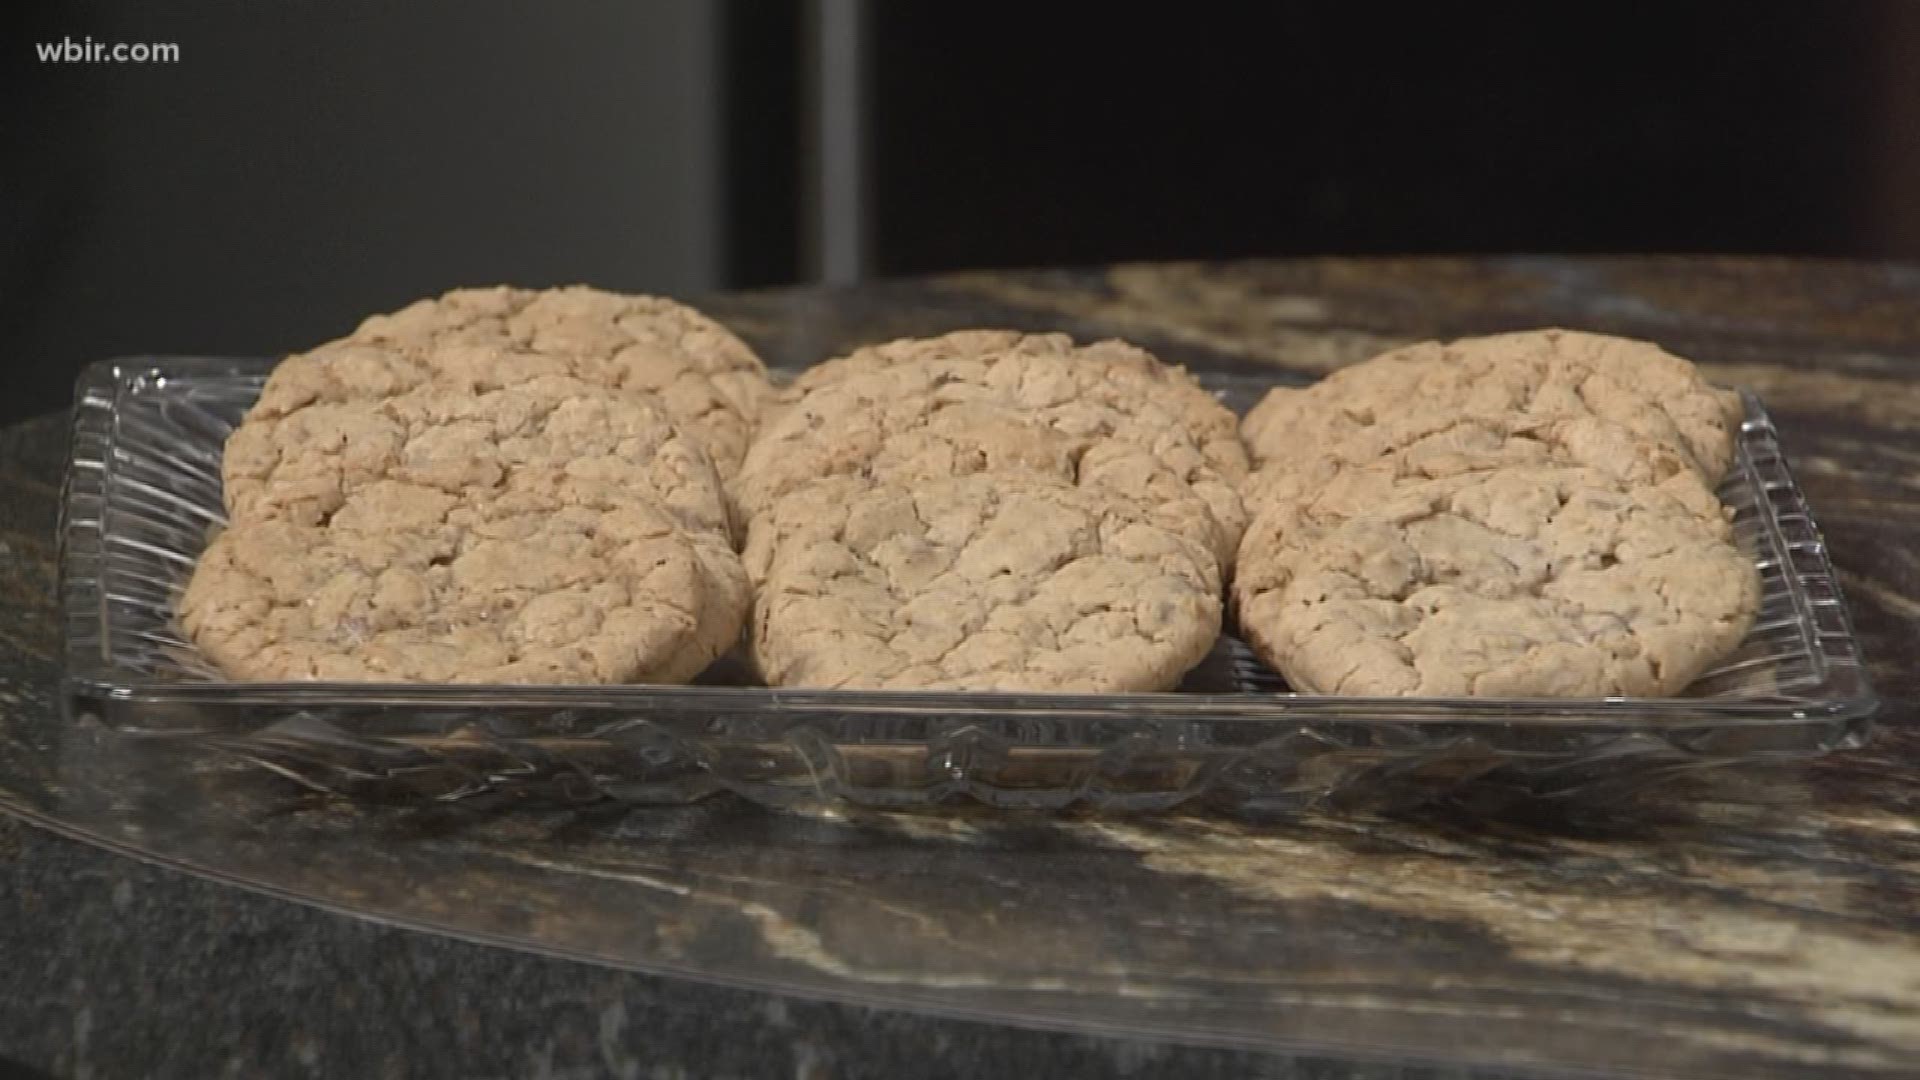 Betty Henry from B and G Catering is with me now in the kitchen - and we're making Milk Chocolate Oatmeal cookies!